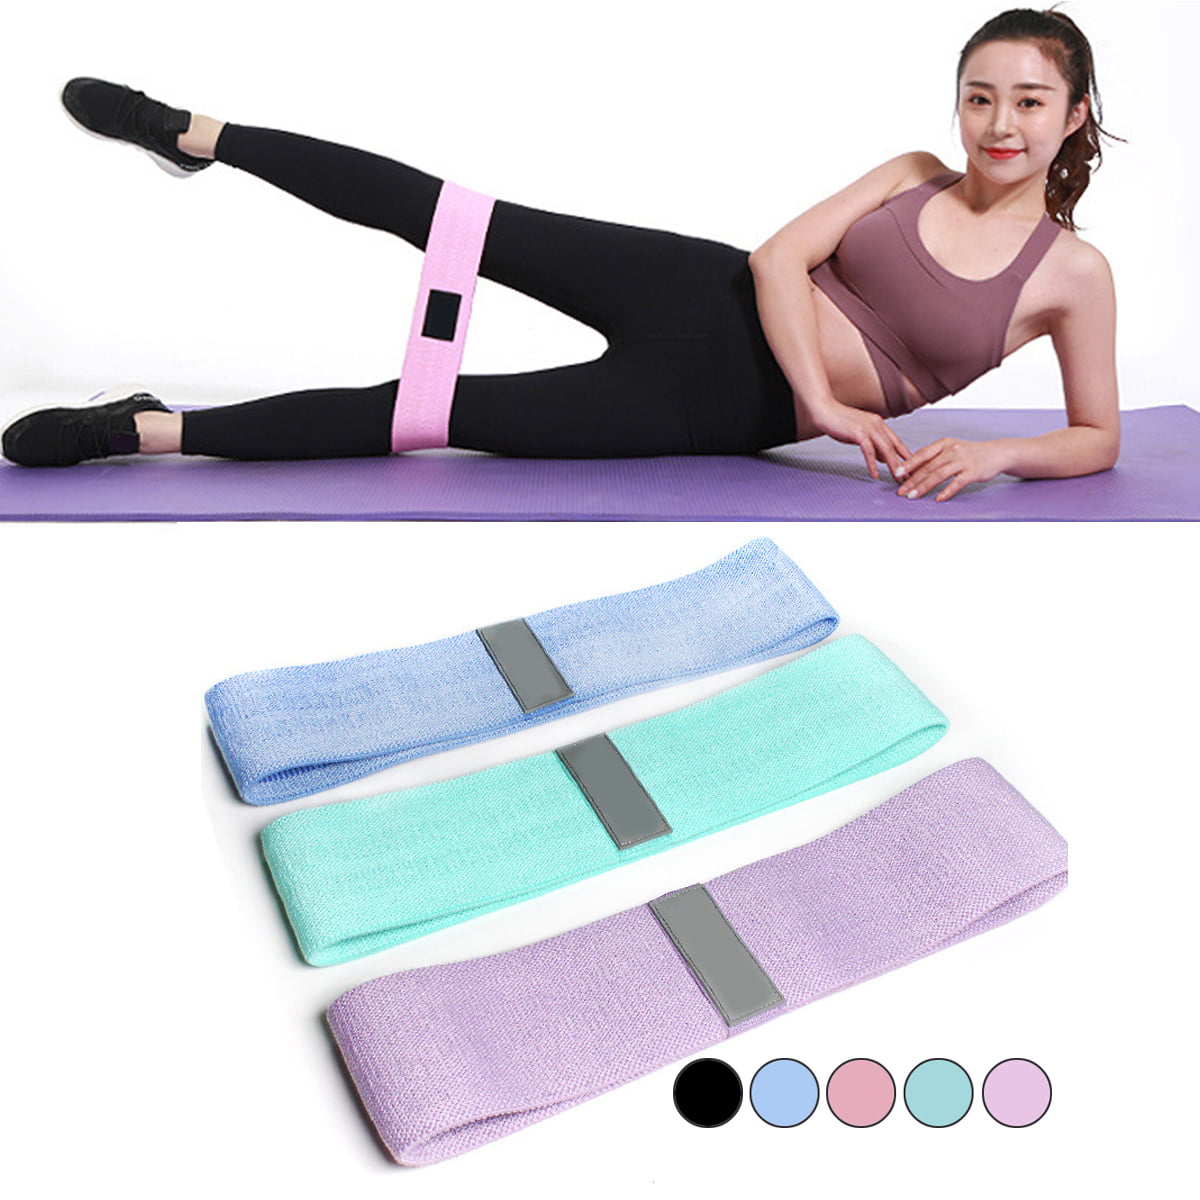 Hip Resistance Circle Band Yoga Peach Booty Sports Abductor Glute Fitness Gym 